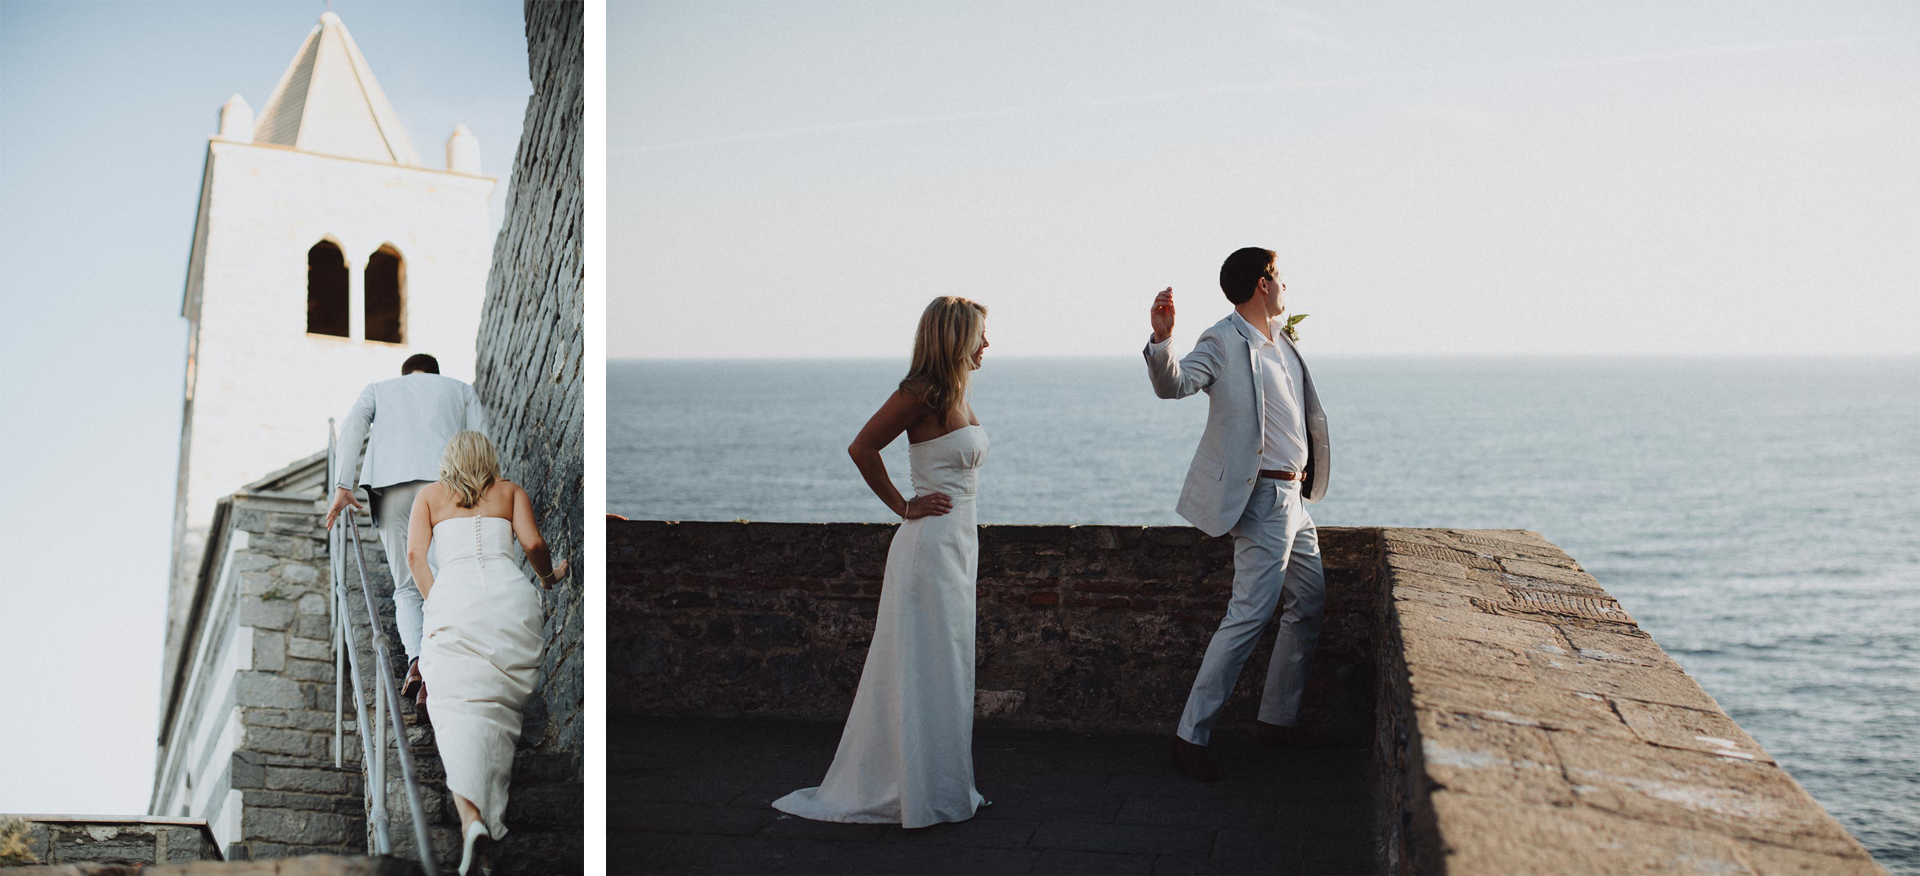 Kristy-Seth-Italy-Elopement-096@2x.png